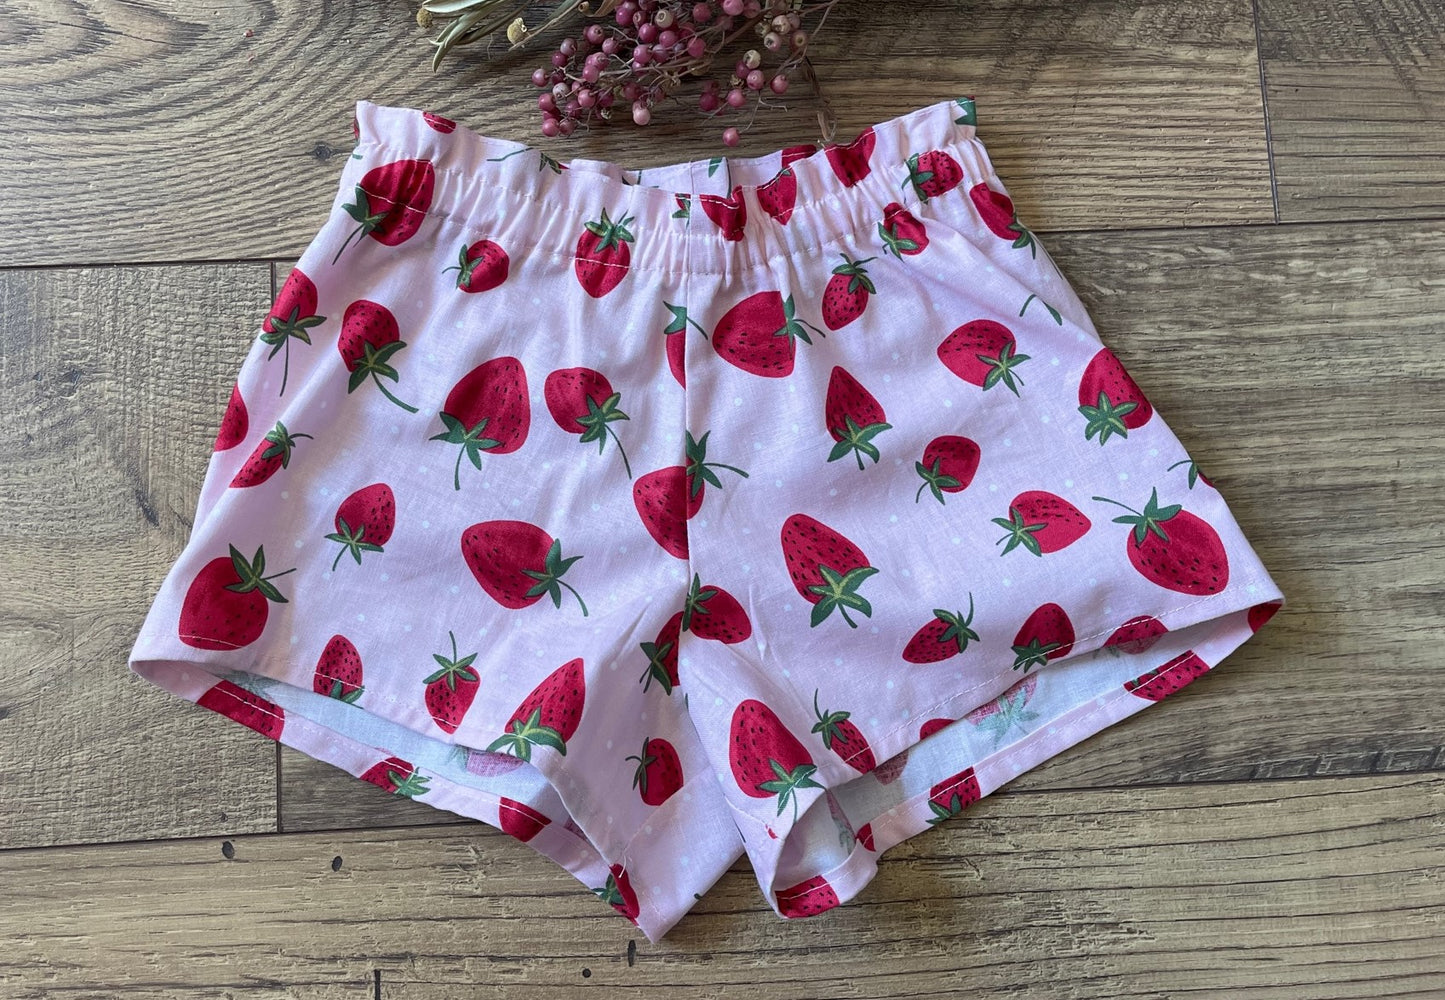 Girls Infant Toddler STRAWBERRY Boho Clothing 2 piece outfit Halter top with shorts